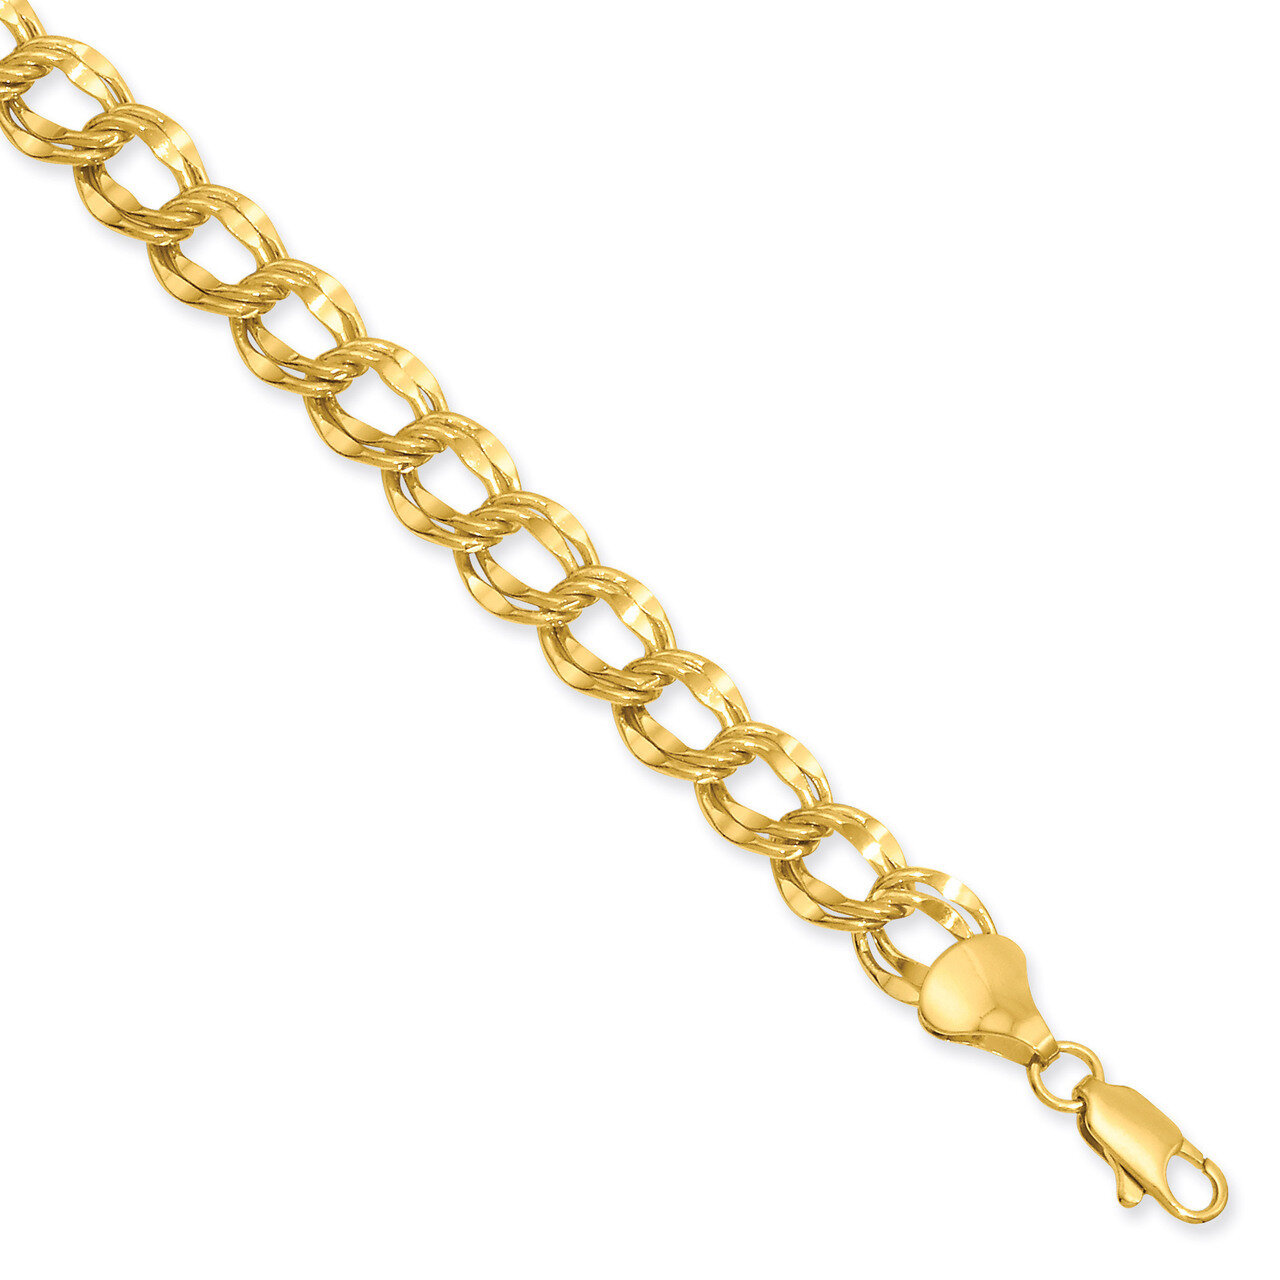 Kelly Waters 8mm Double Link Charm Bracelet 7.25 Inch Gold-plated KW493-7.25